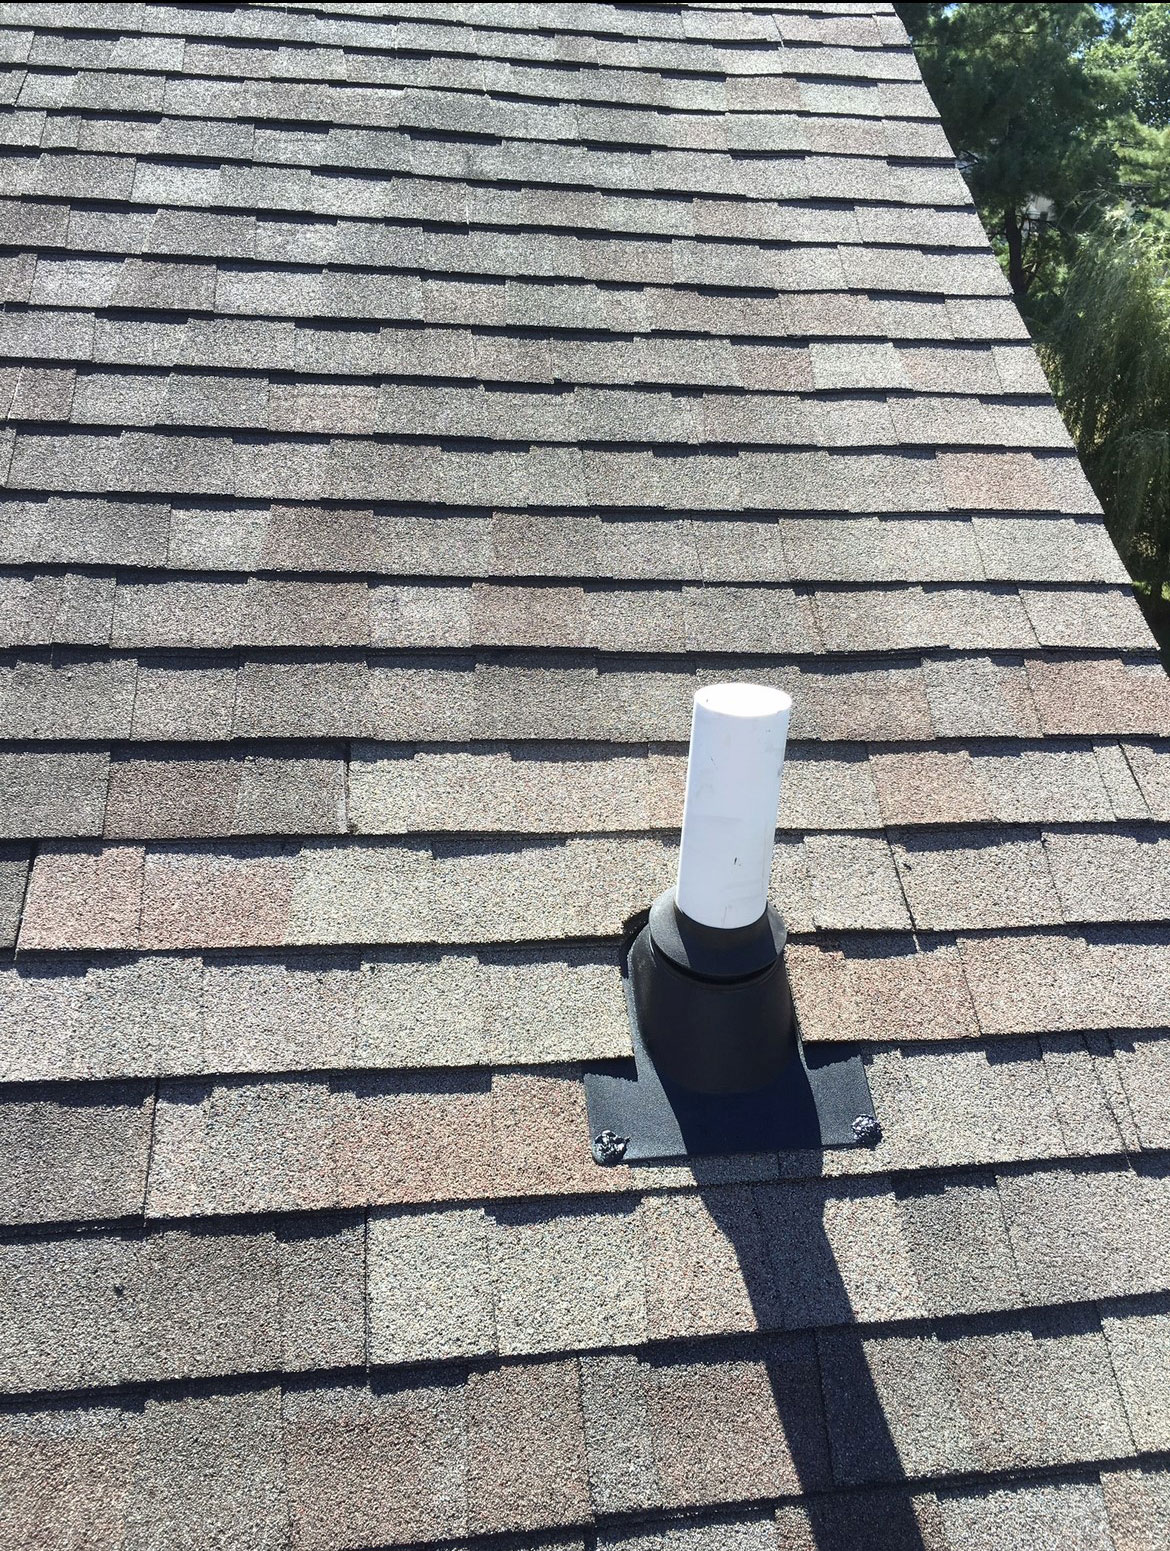 leaking roof is repaired using a high-quality vent pipe flashing boot.